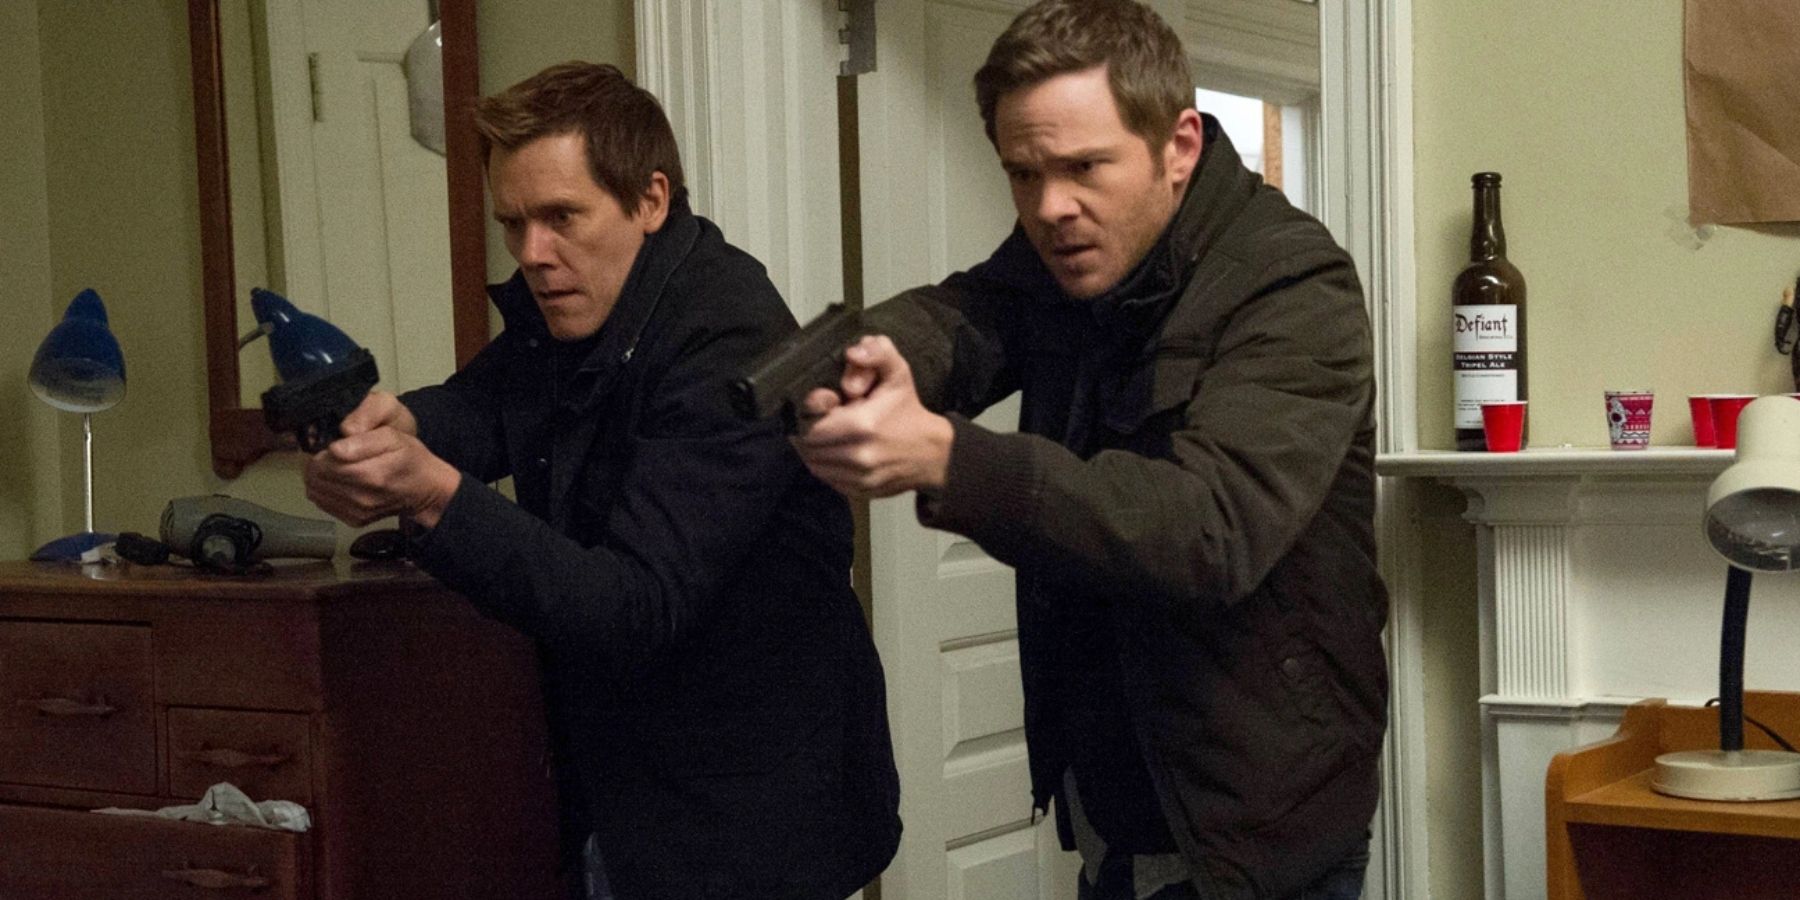 Ryan Hardy (Kevin Bacon) and Mike Weston (Shawn Ashmore) in The Following